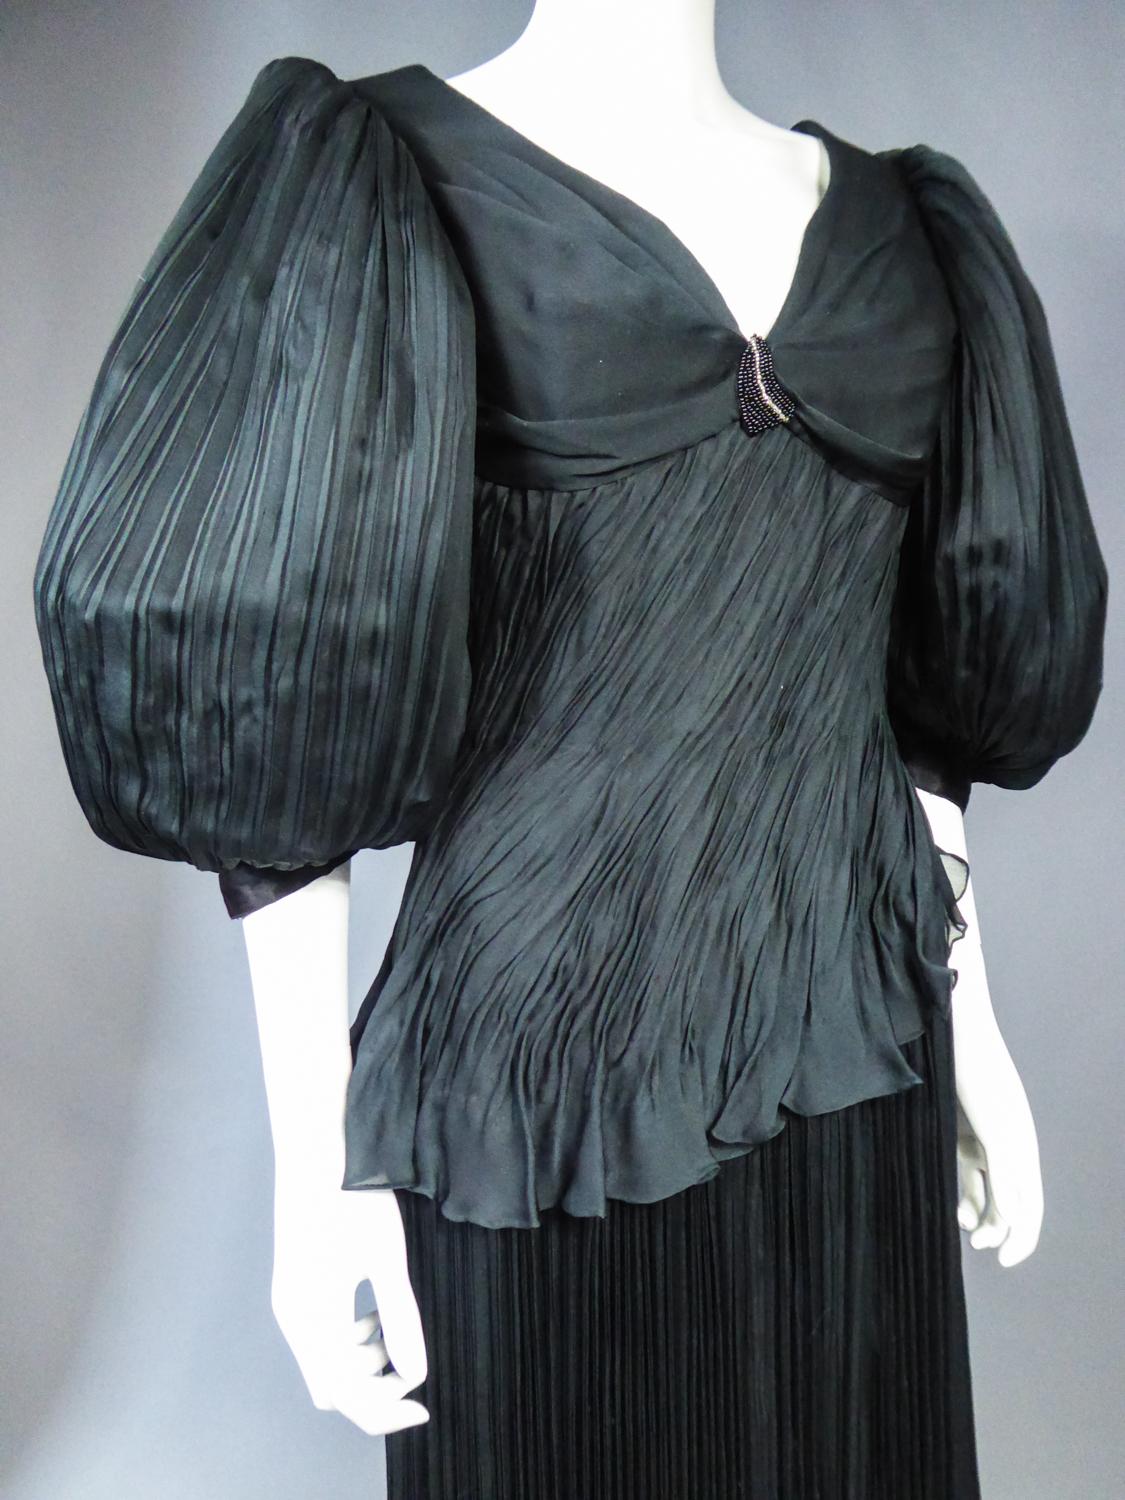 An Emanuel Ungaro French Evening Dress Numbered 295-5-85 Circa 1985/1990 For Sale 6